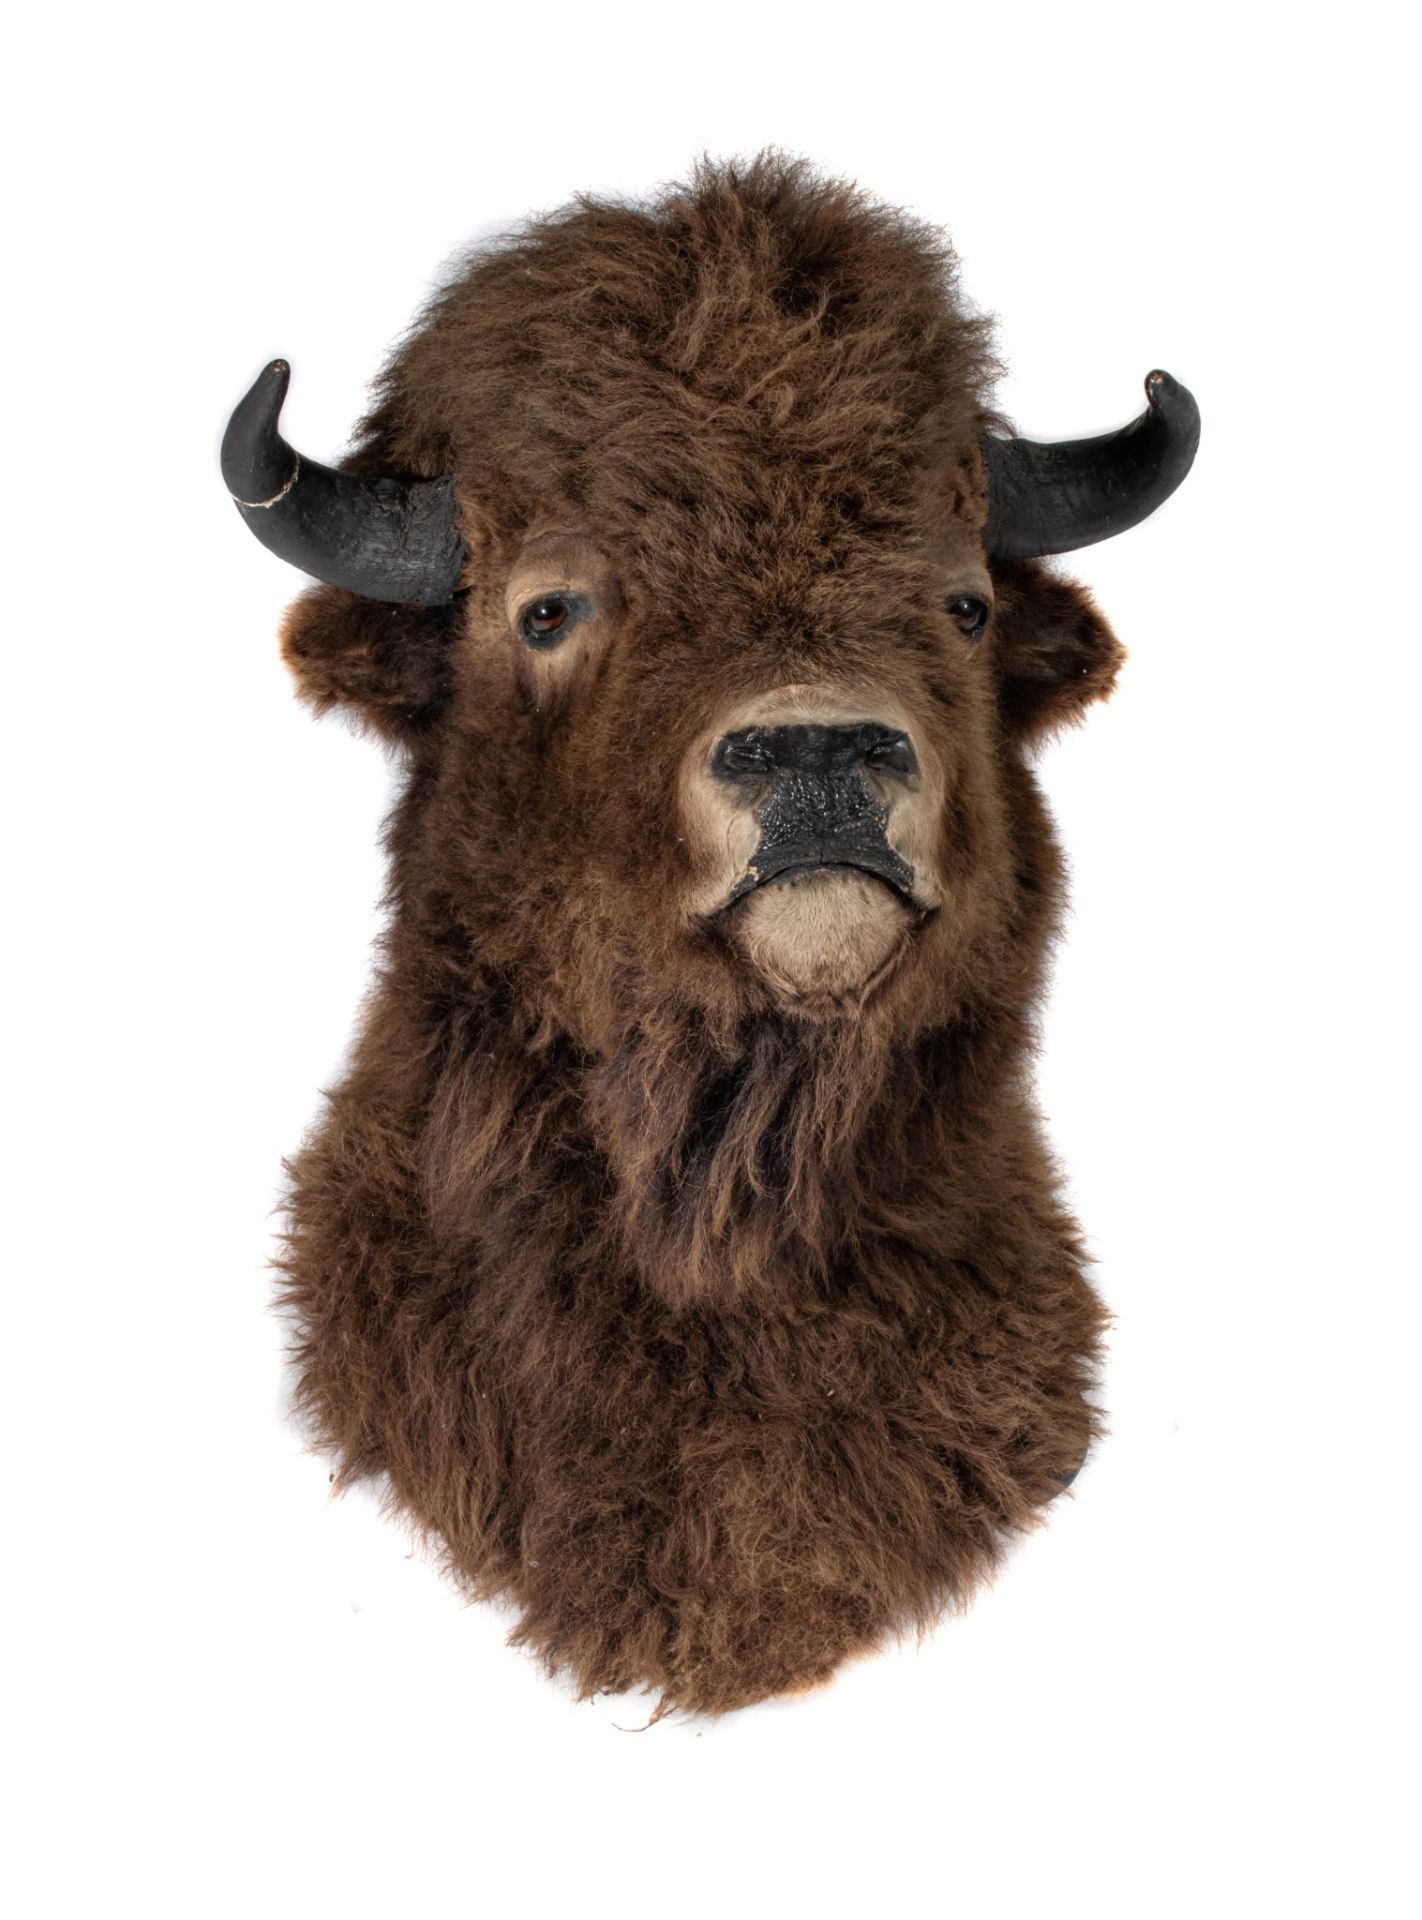 A taxidermic head of an American bison, H 90 cm